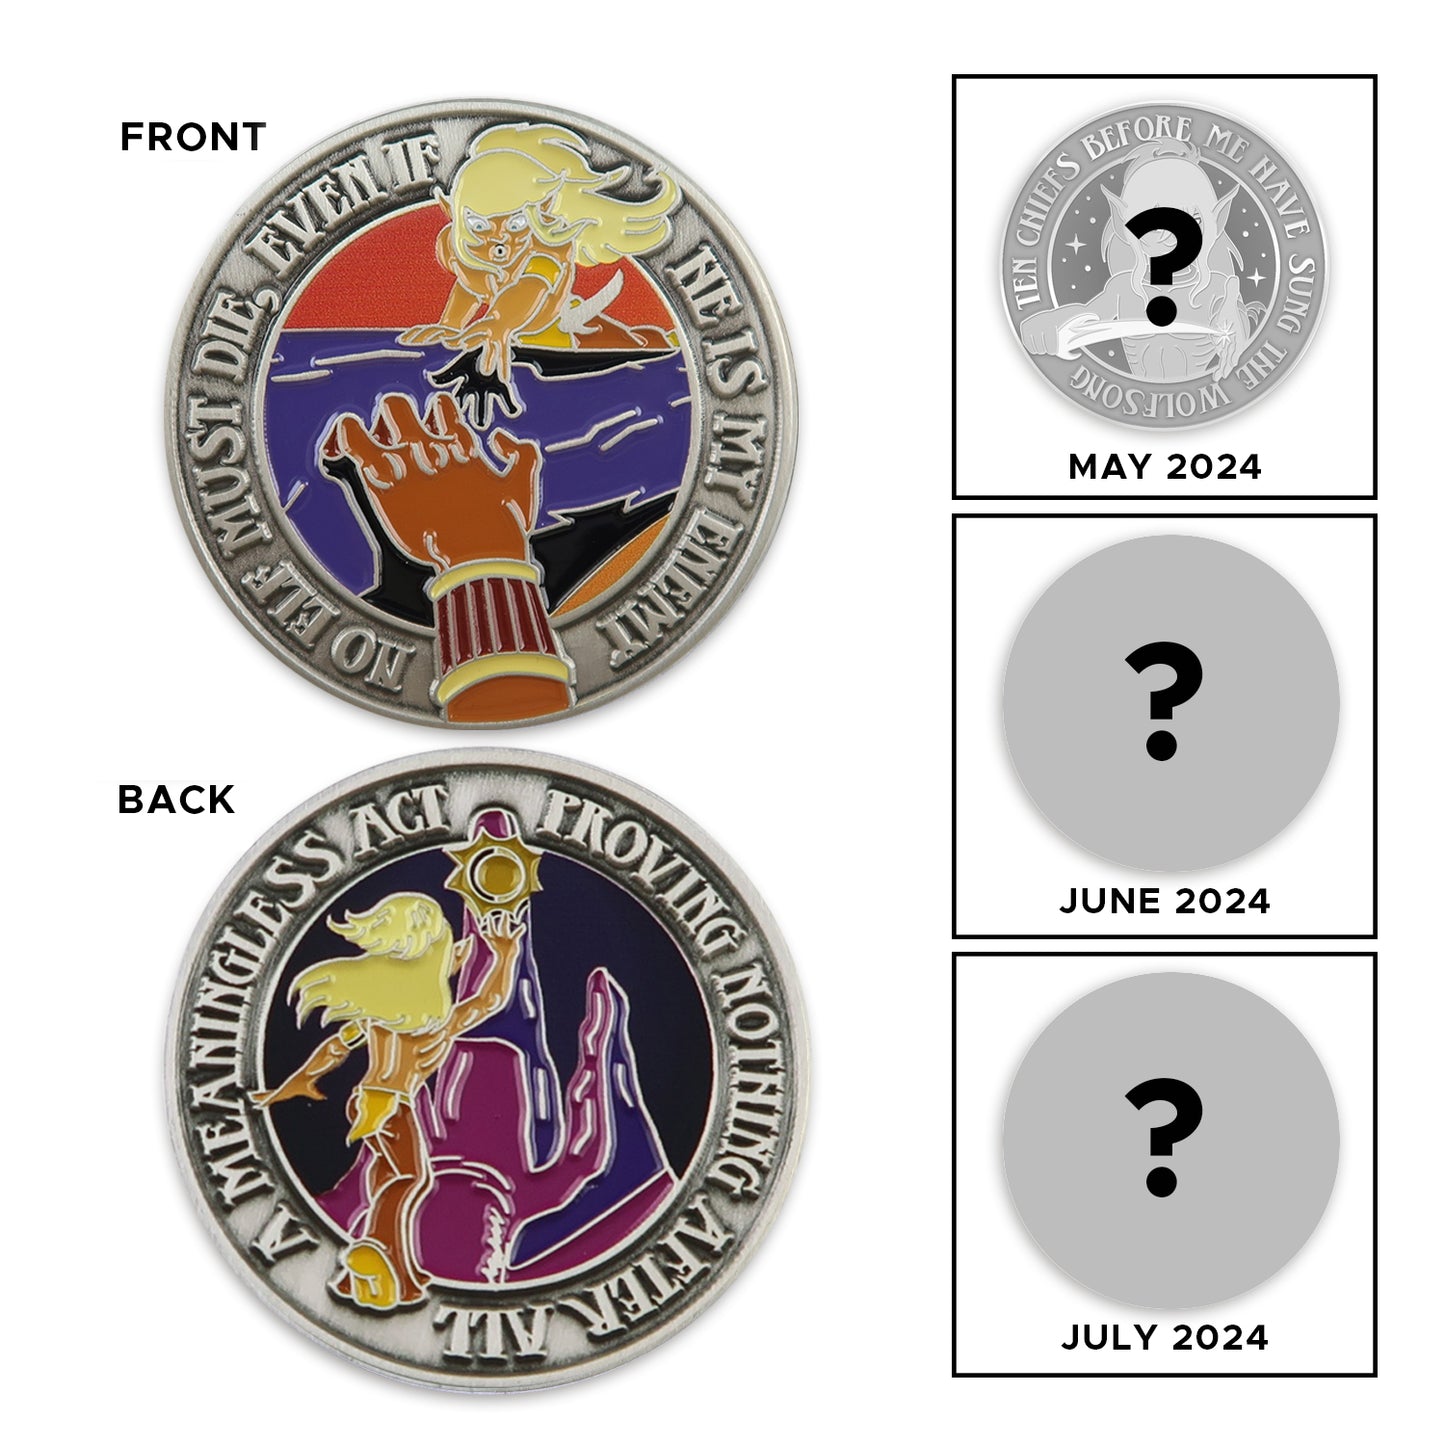 A front and back image of a brass challenge coin, against a white background. On the front is a drawing of the Elfquest character Cutter, reaching out to grab a dark brown hand. Raised text around the edge says “no elf must die, even if he is my enemy.” The back of the coin depicts the Cutter against a purple mountain. Around the edge, raised text says “A meaningless act, proving nothing after all." 